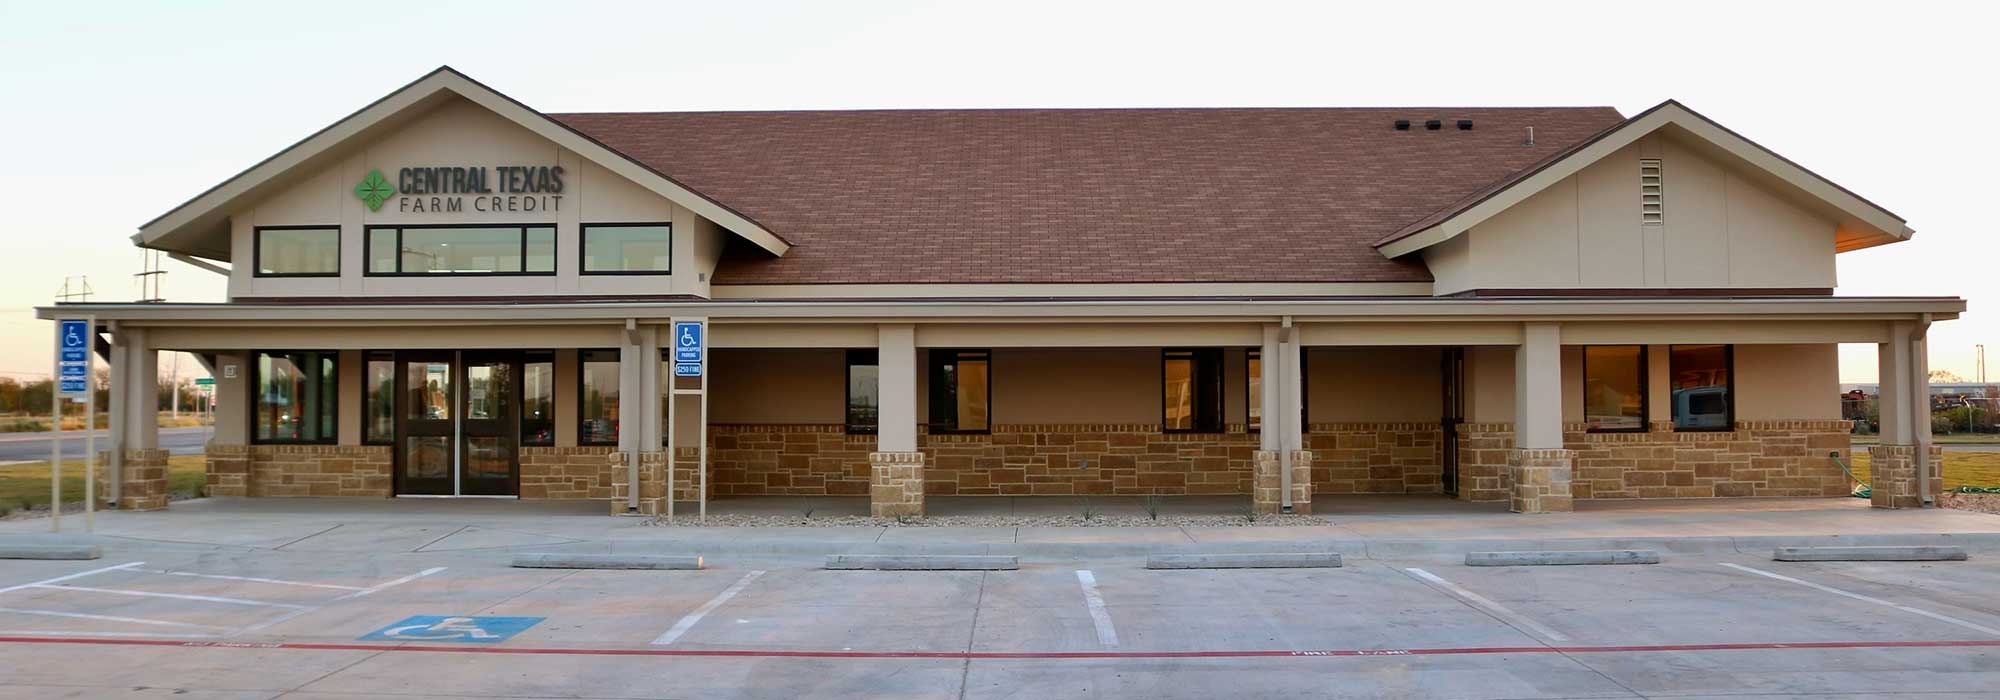 Central Texas Farm Credit's new San Angelo branch office building.